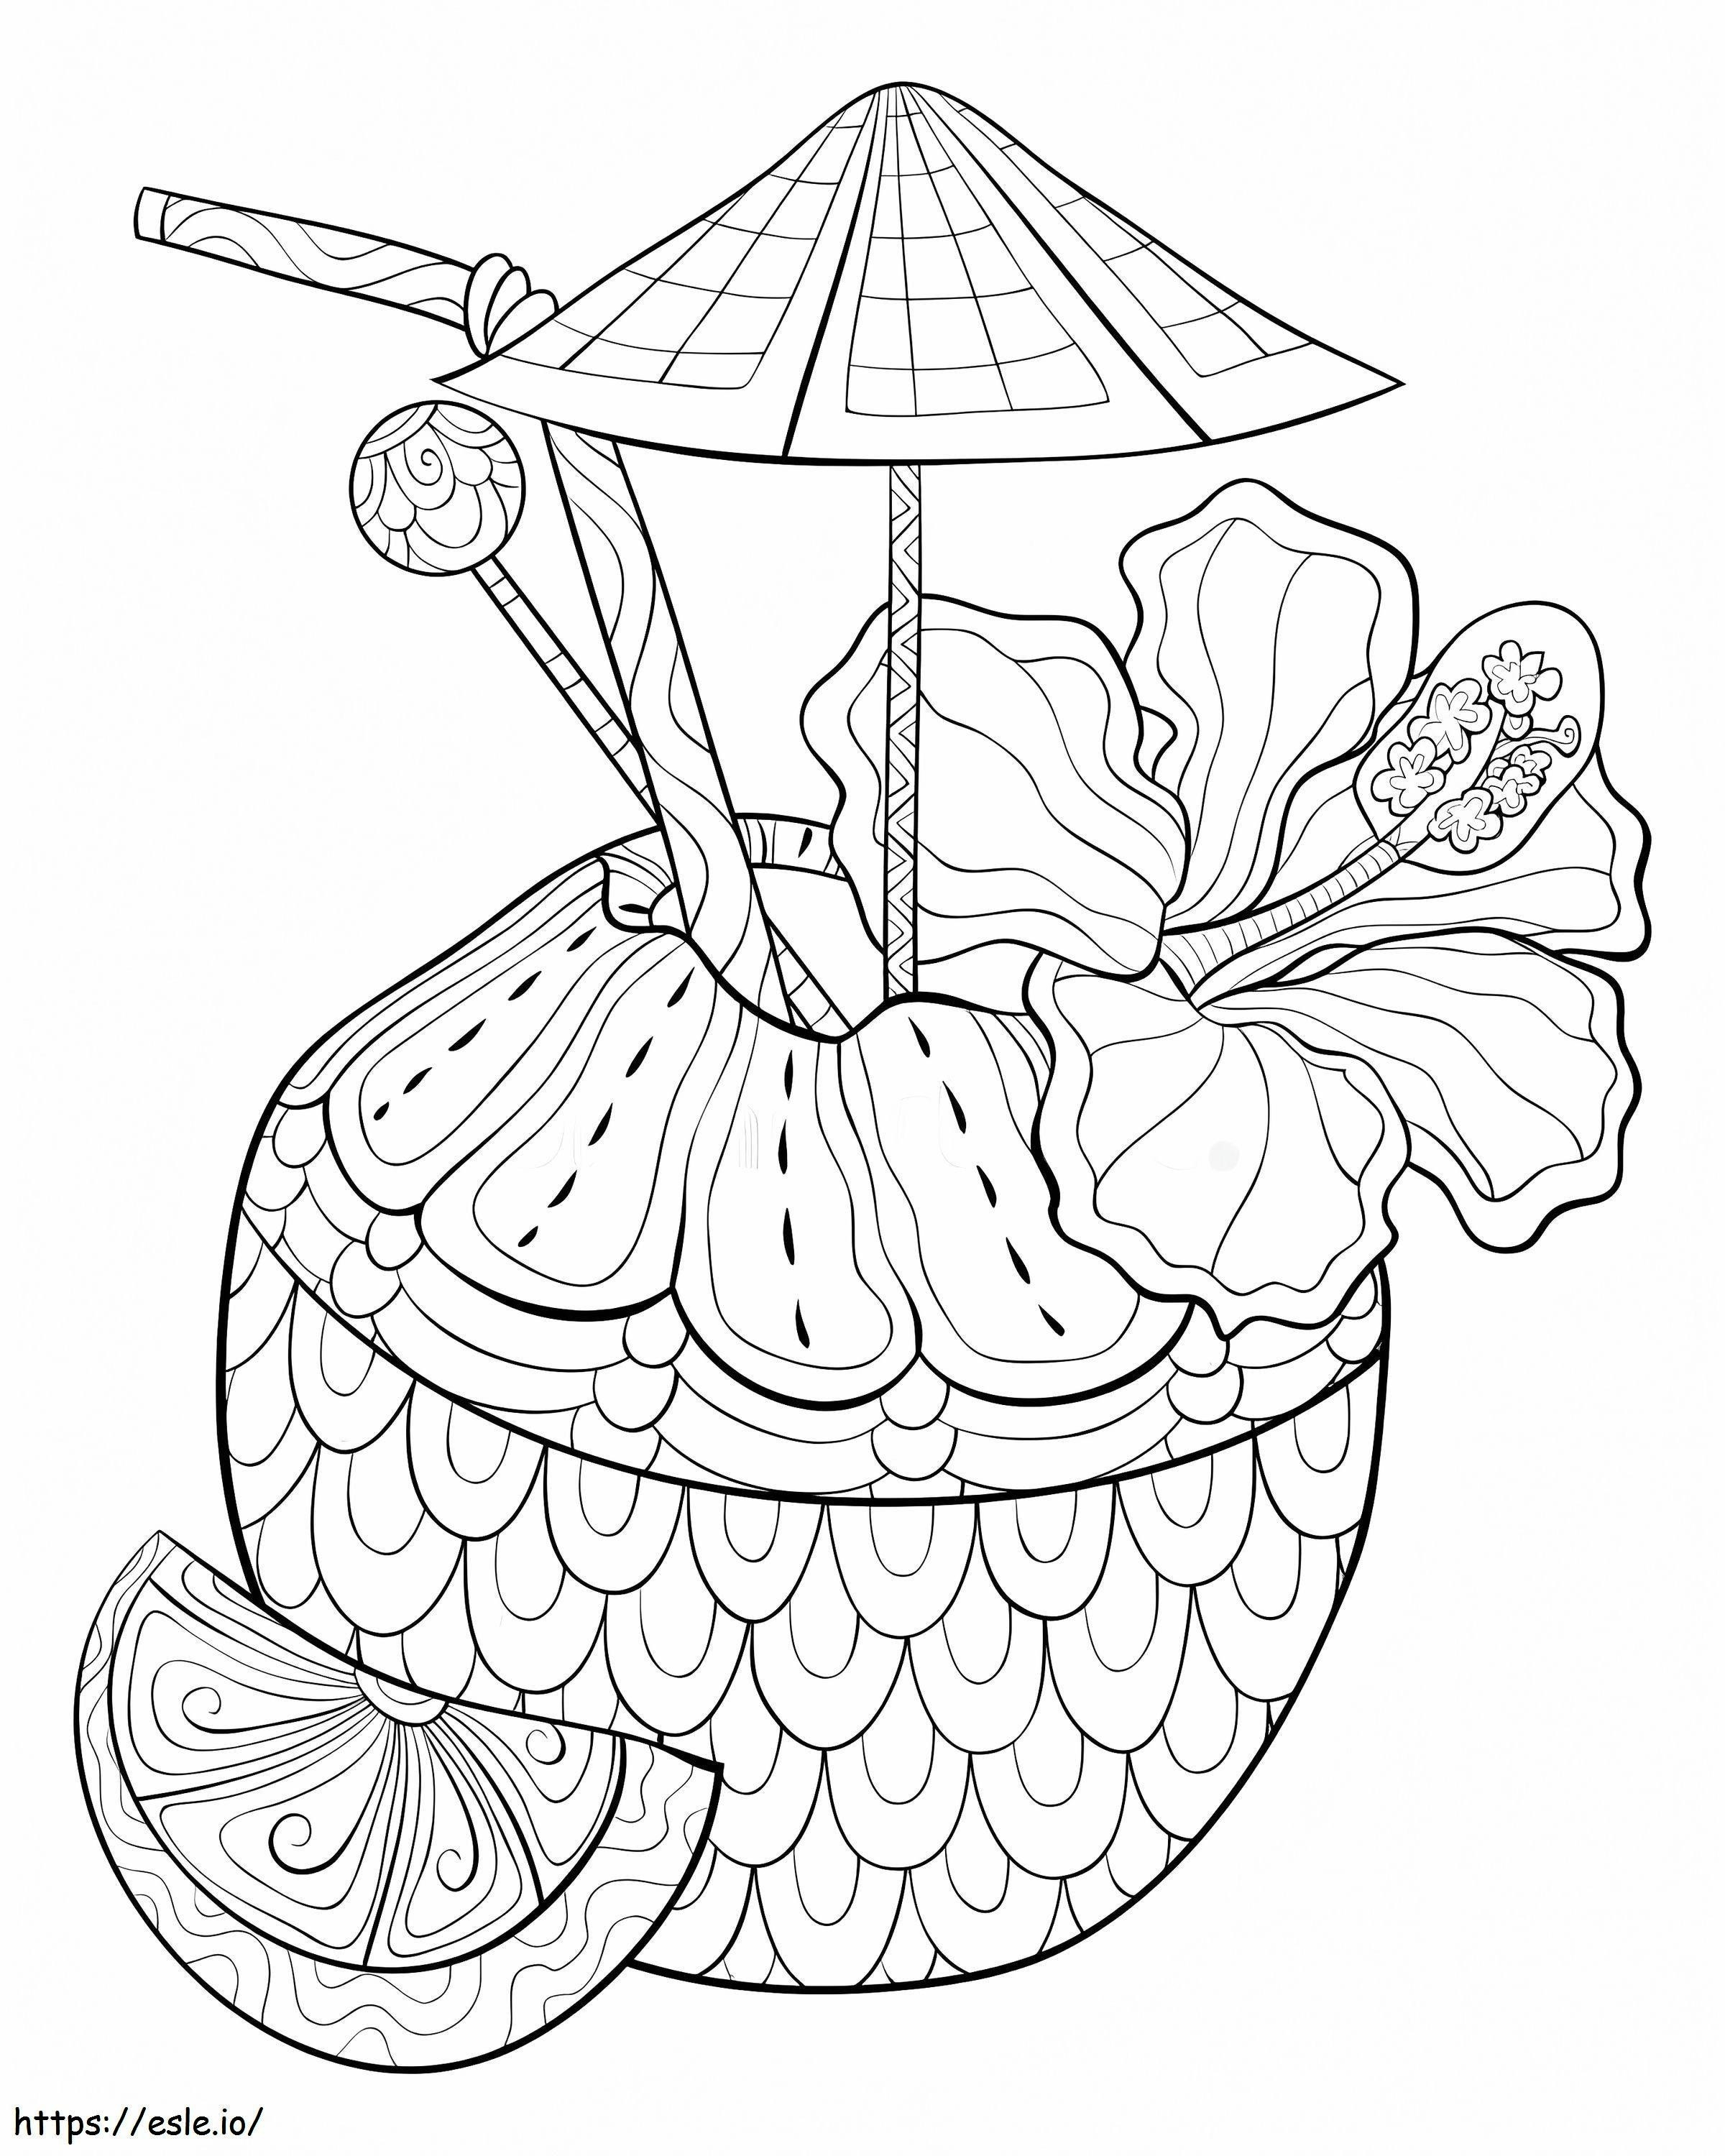 Adult Coconut Drink coloring page